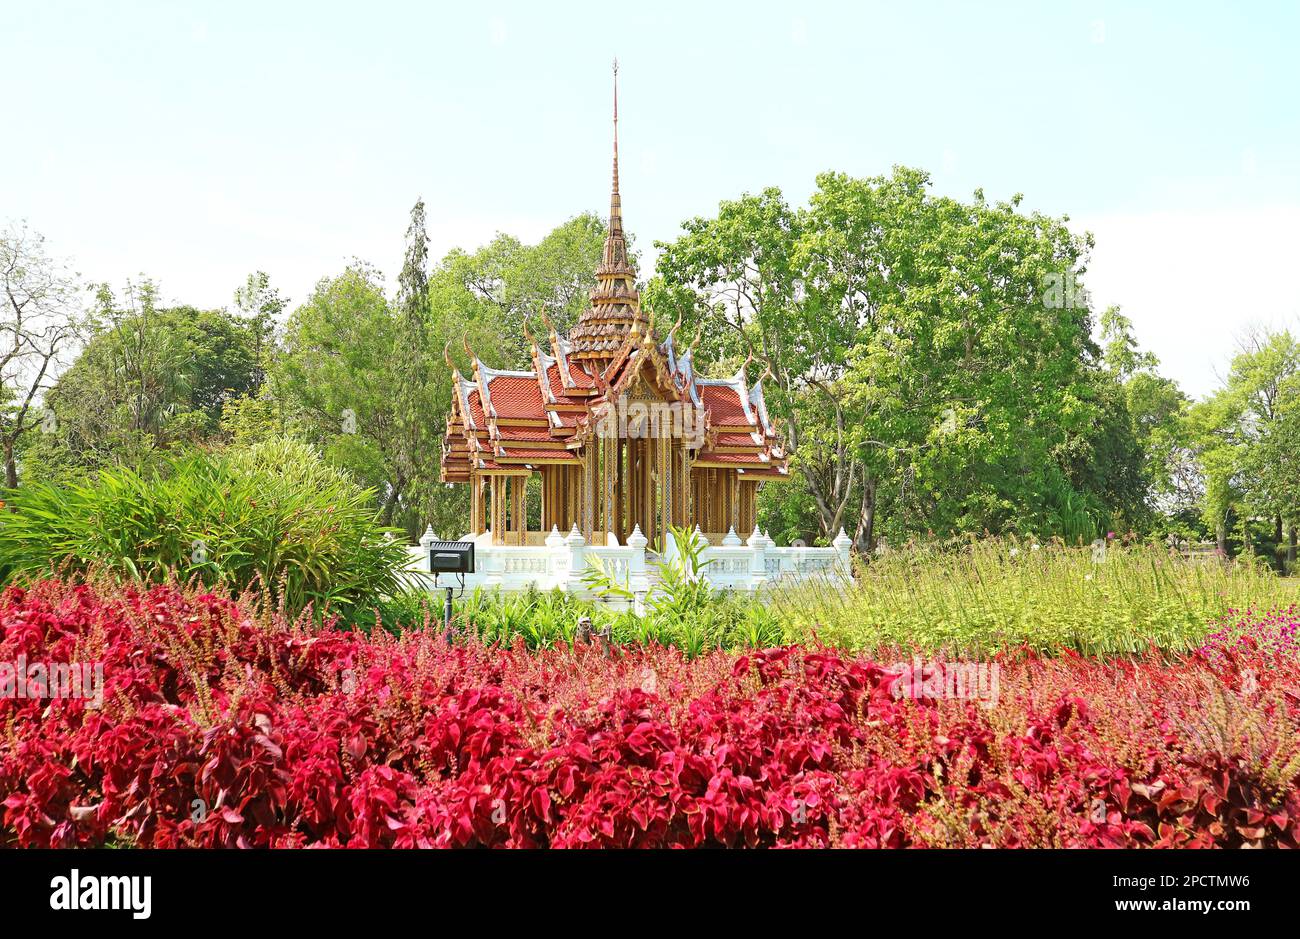 Fantastic Thai Ancient Style Pavilion with Shrubs of Red Coleus in Foreground Stock Photo